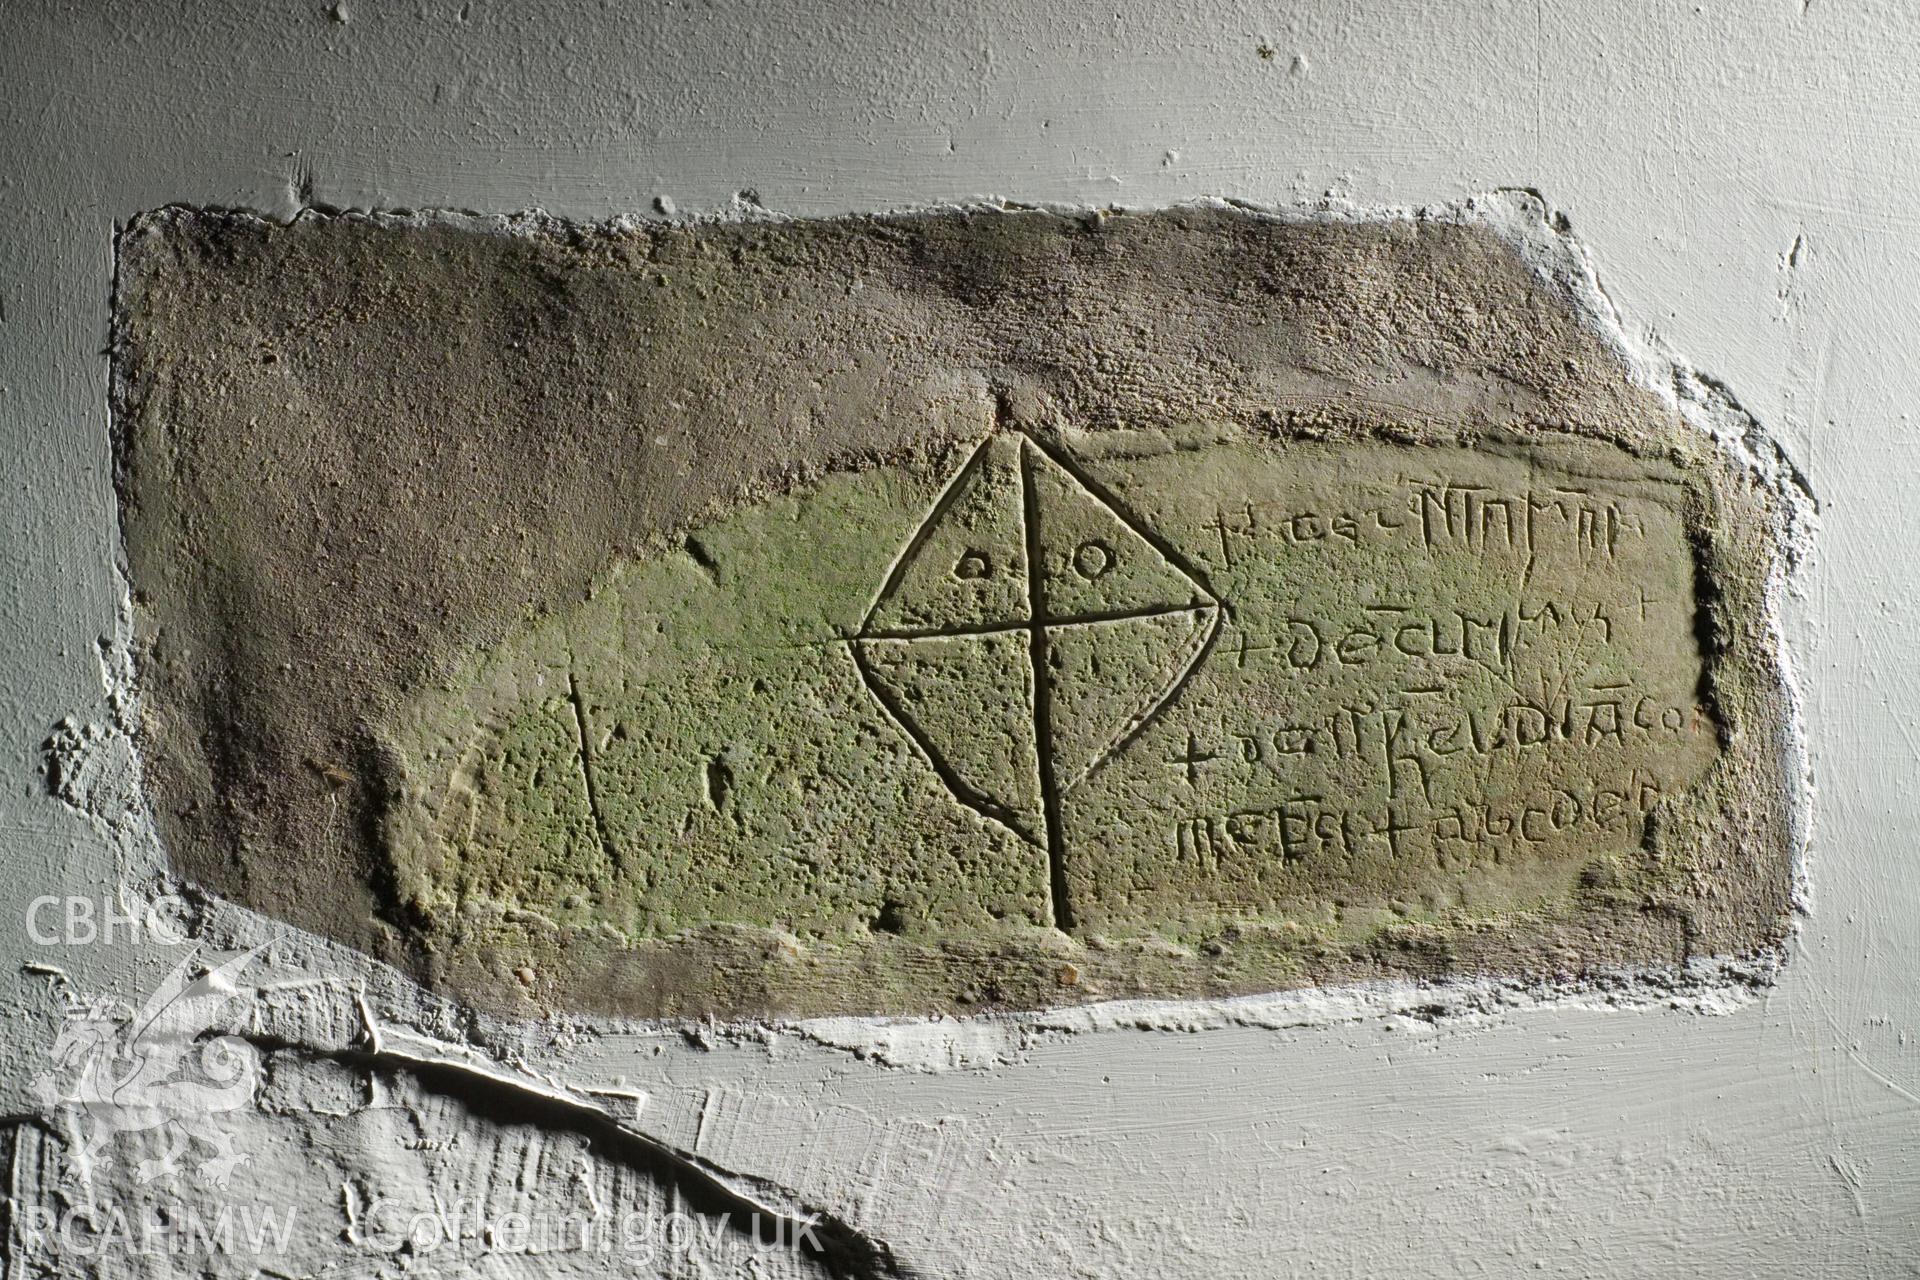 Inscribed stone set in interior north wall